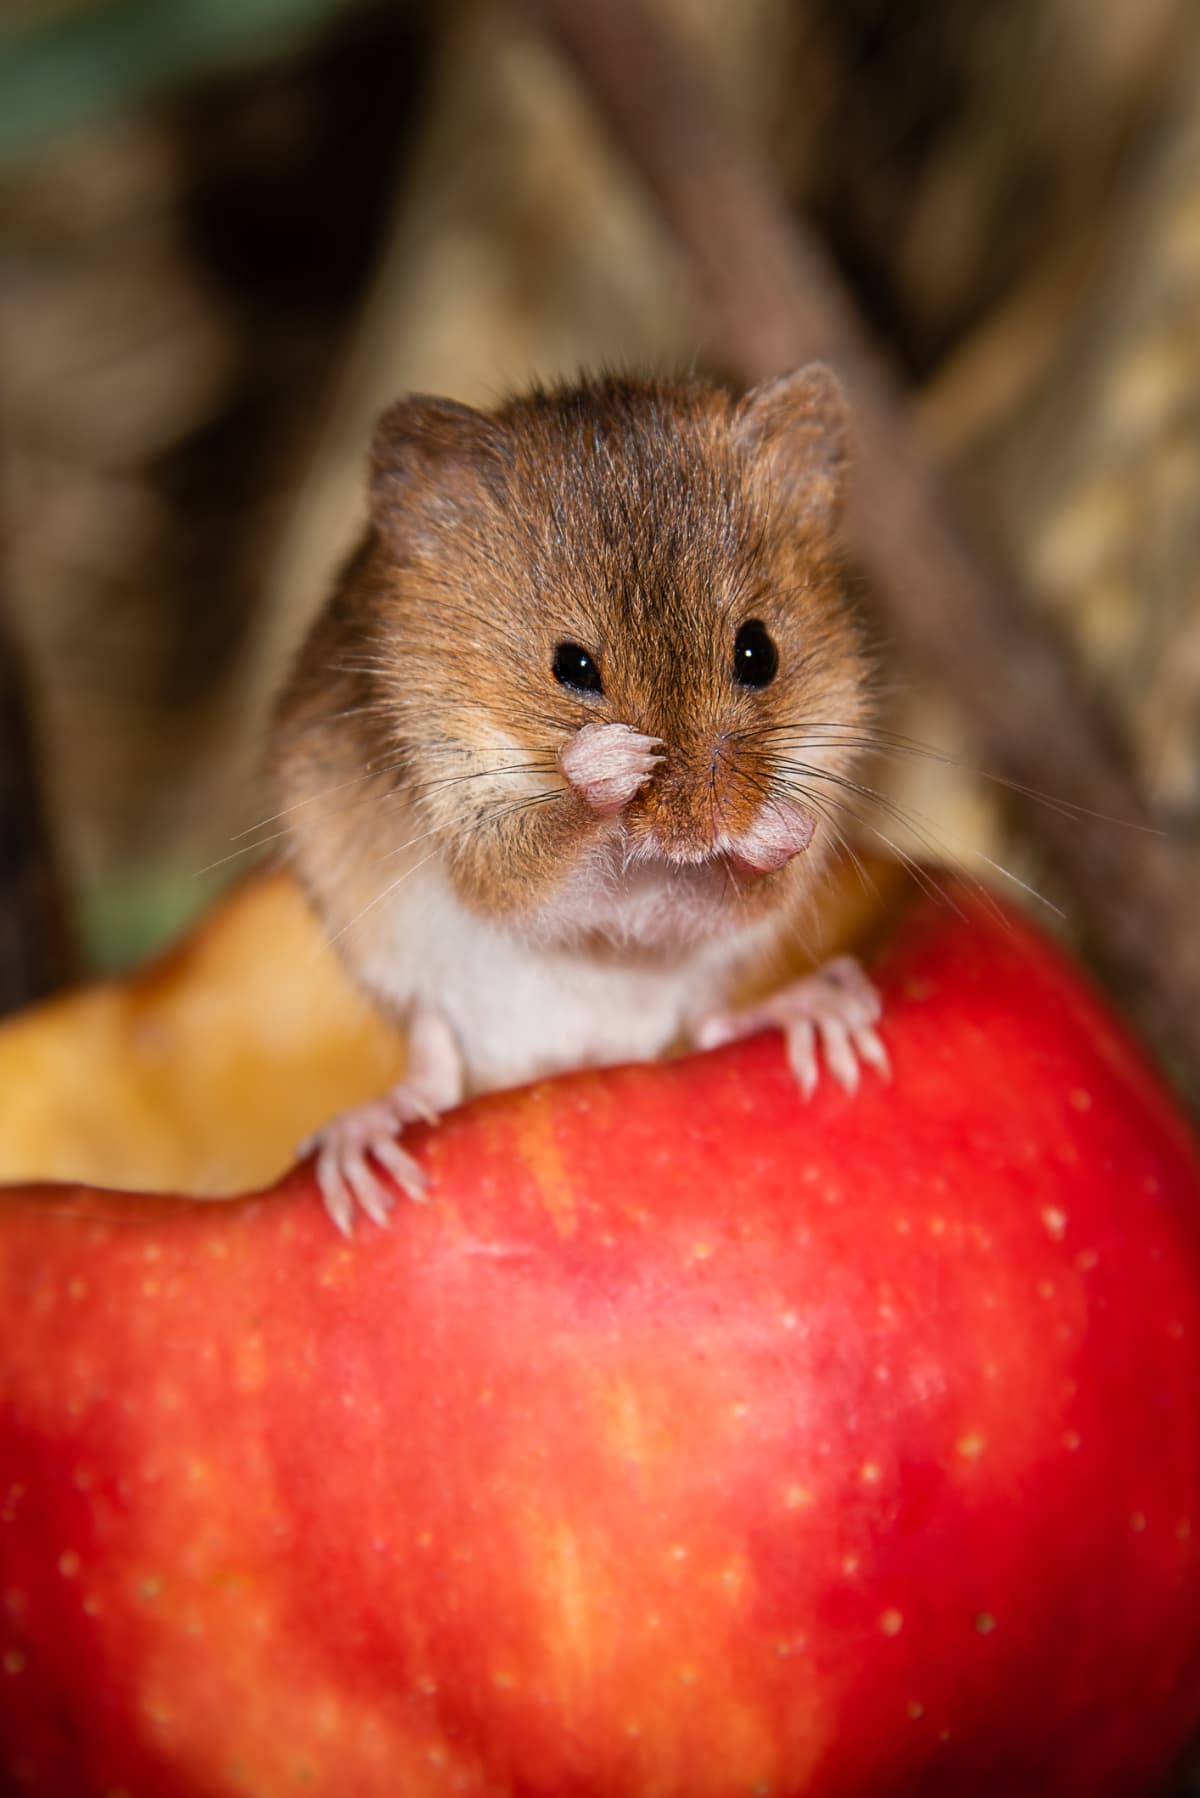 A harvest mouse sits on the edge of a half eaten apple. It has one paw on its face.